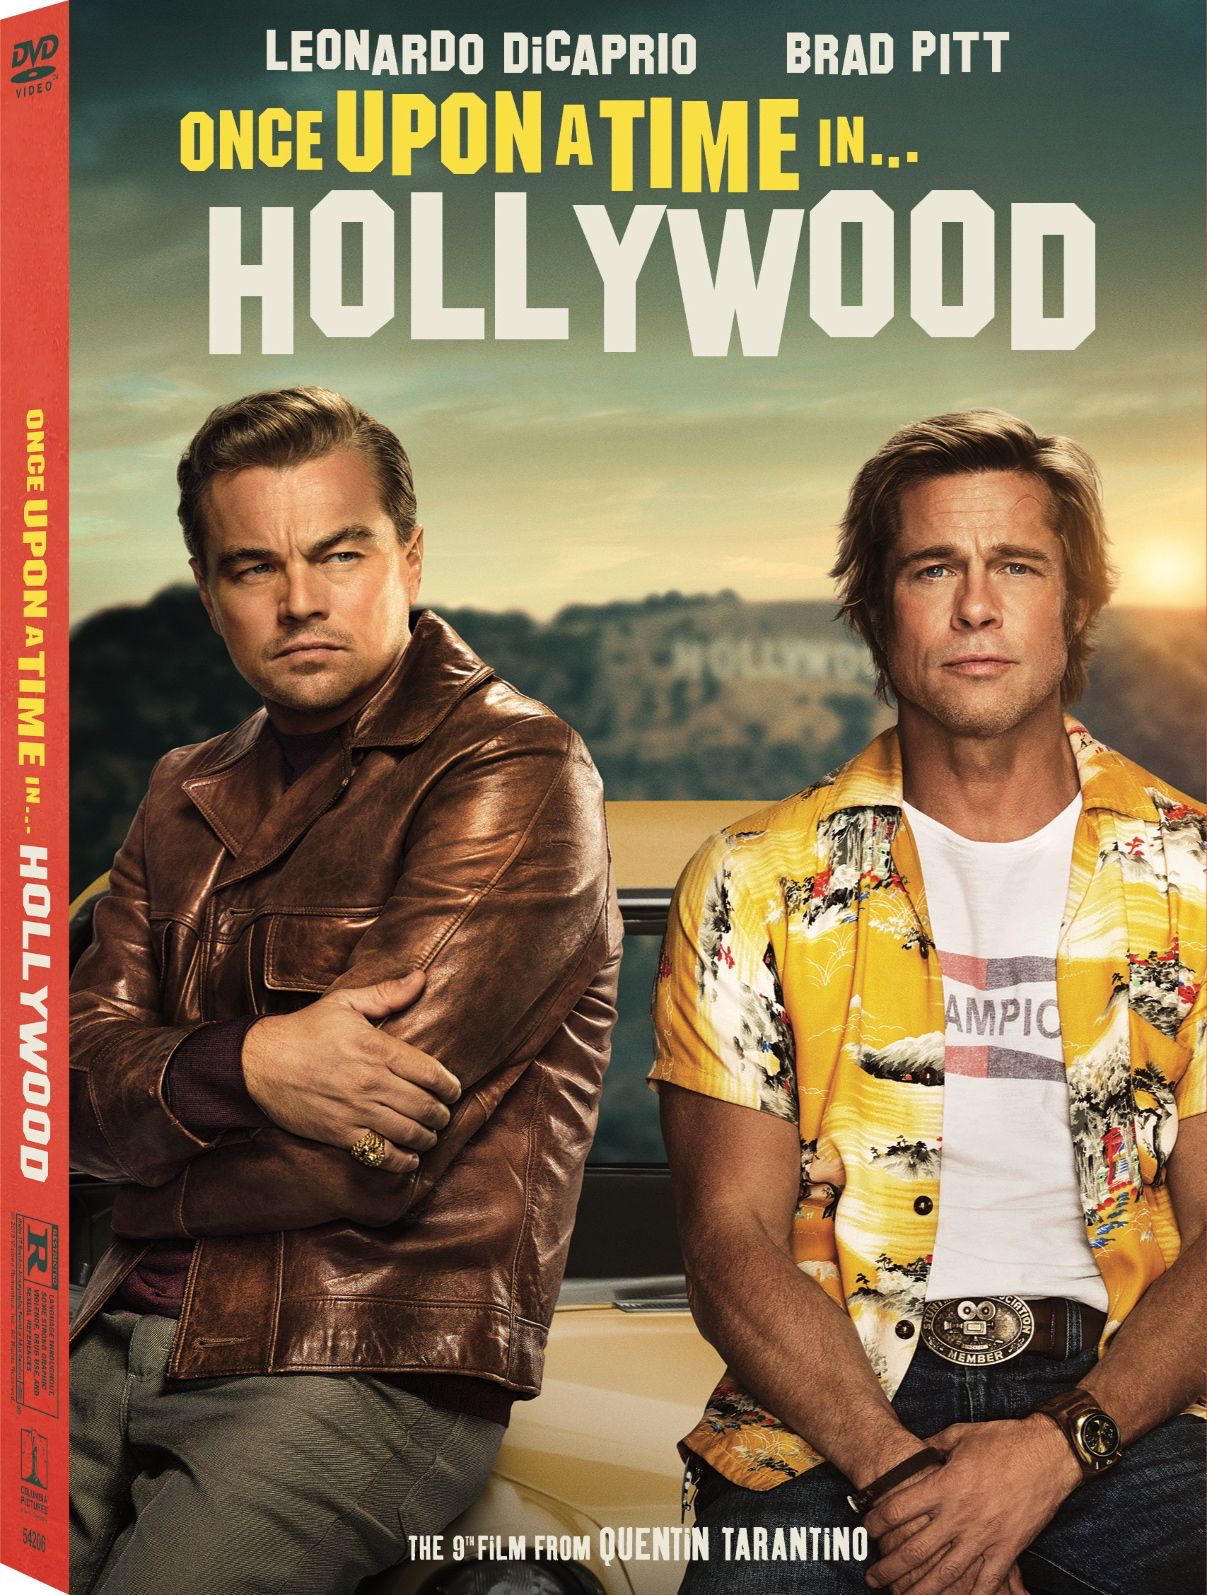 Once Upon a Time in Hollywood Blu-ray DVD cover art